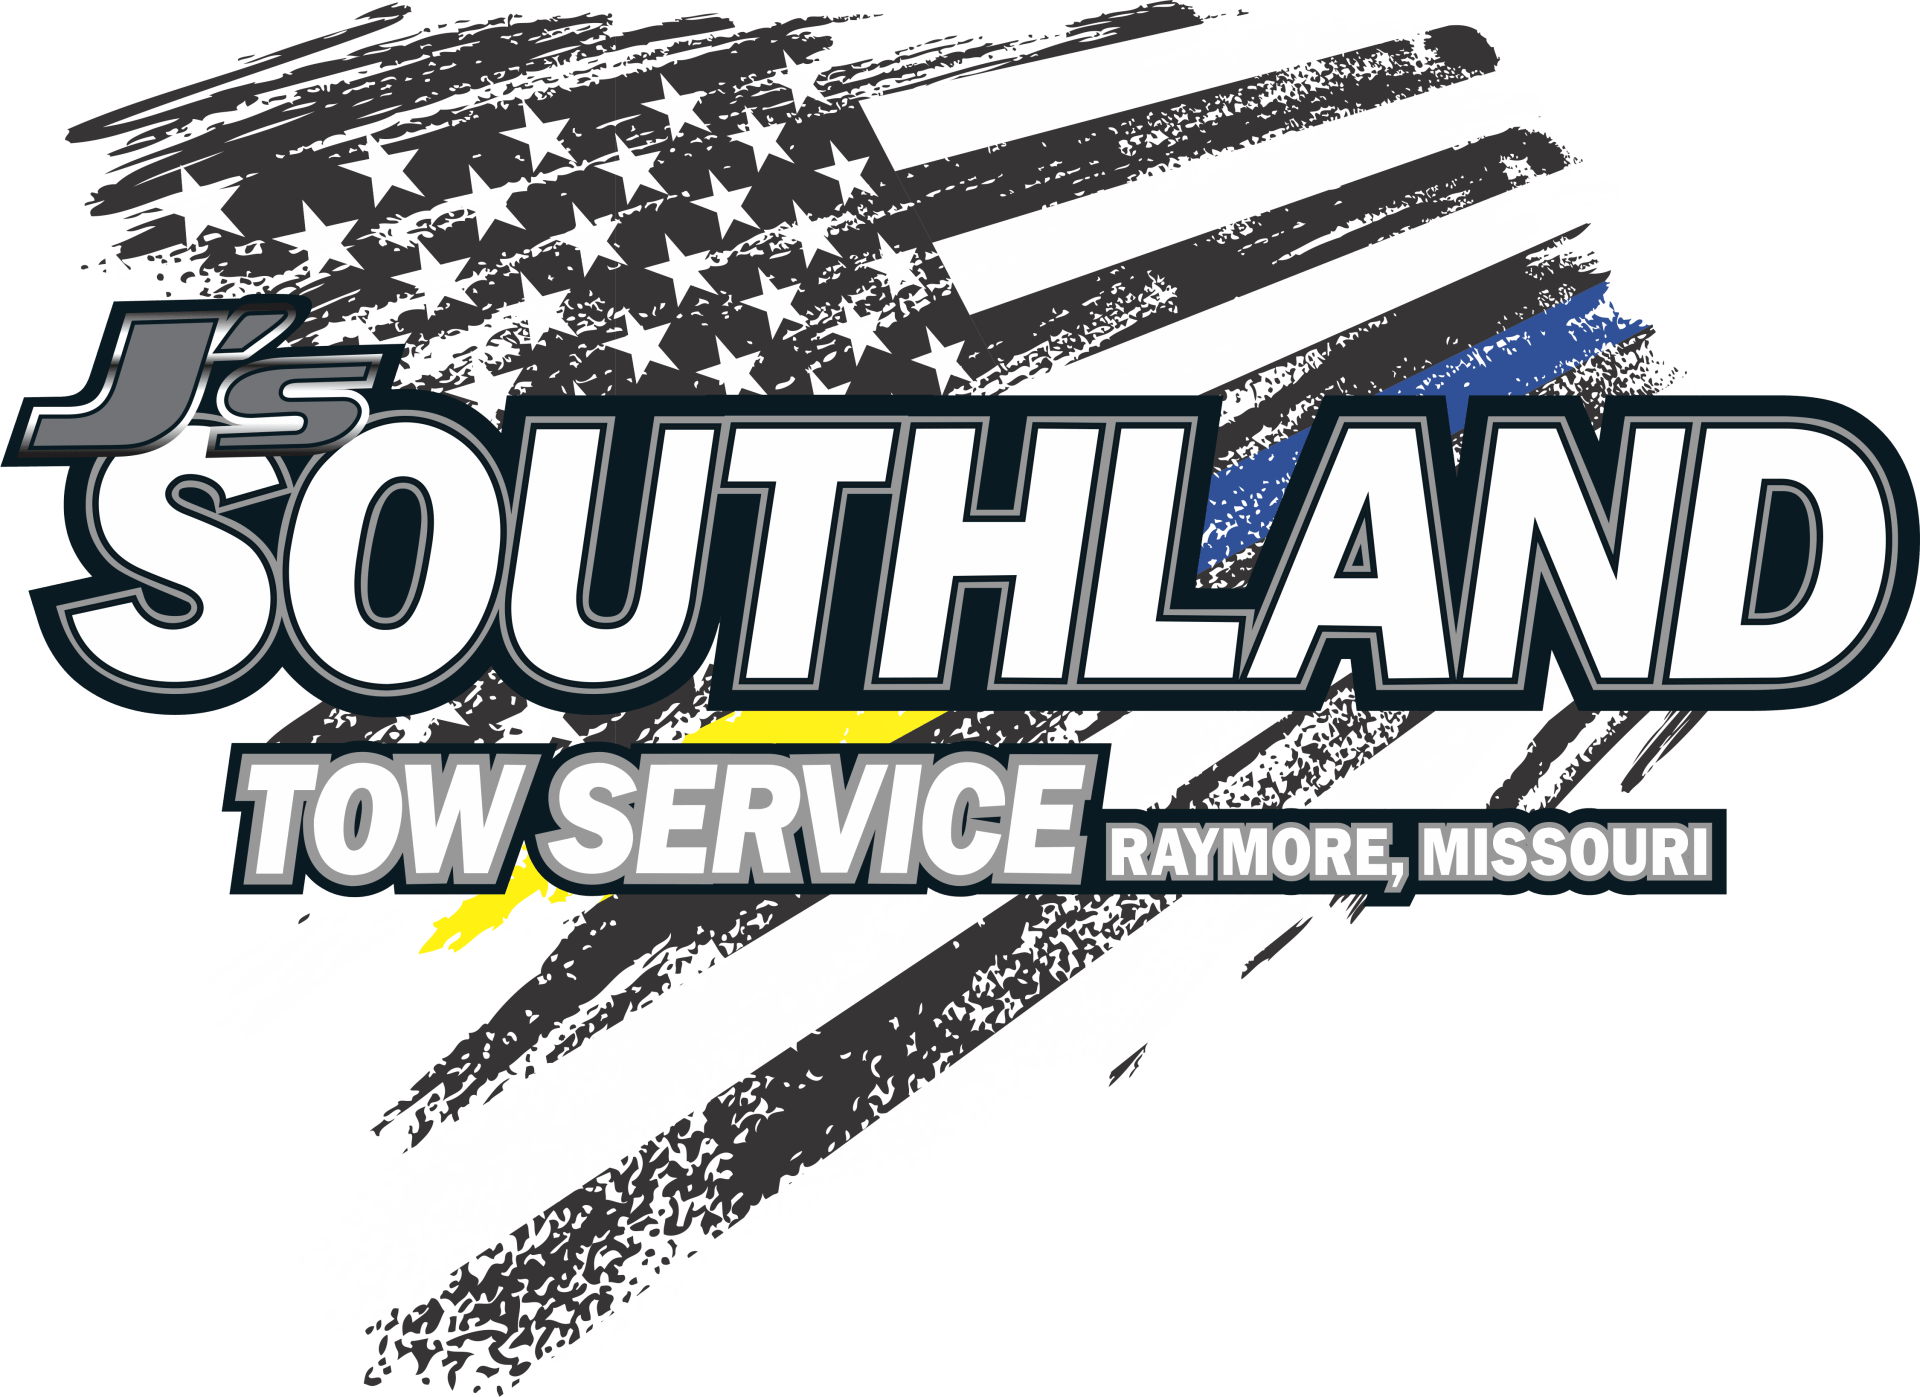 J's Southland Tow Service